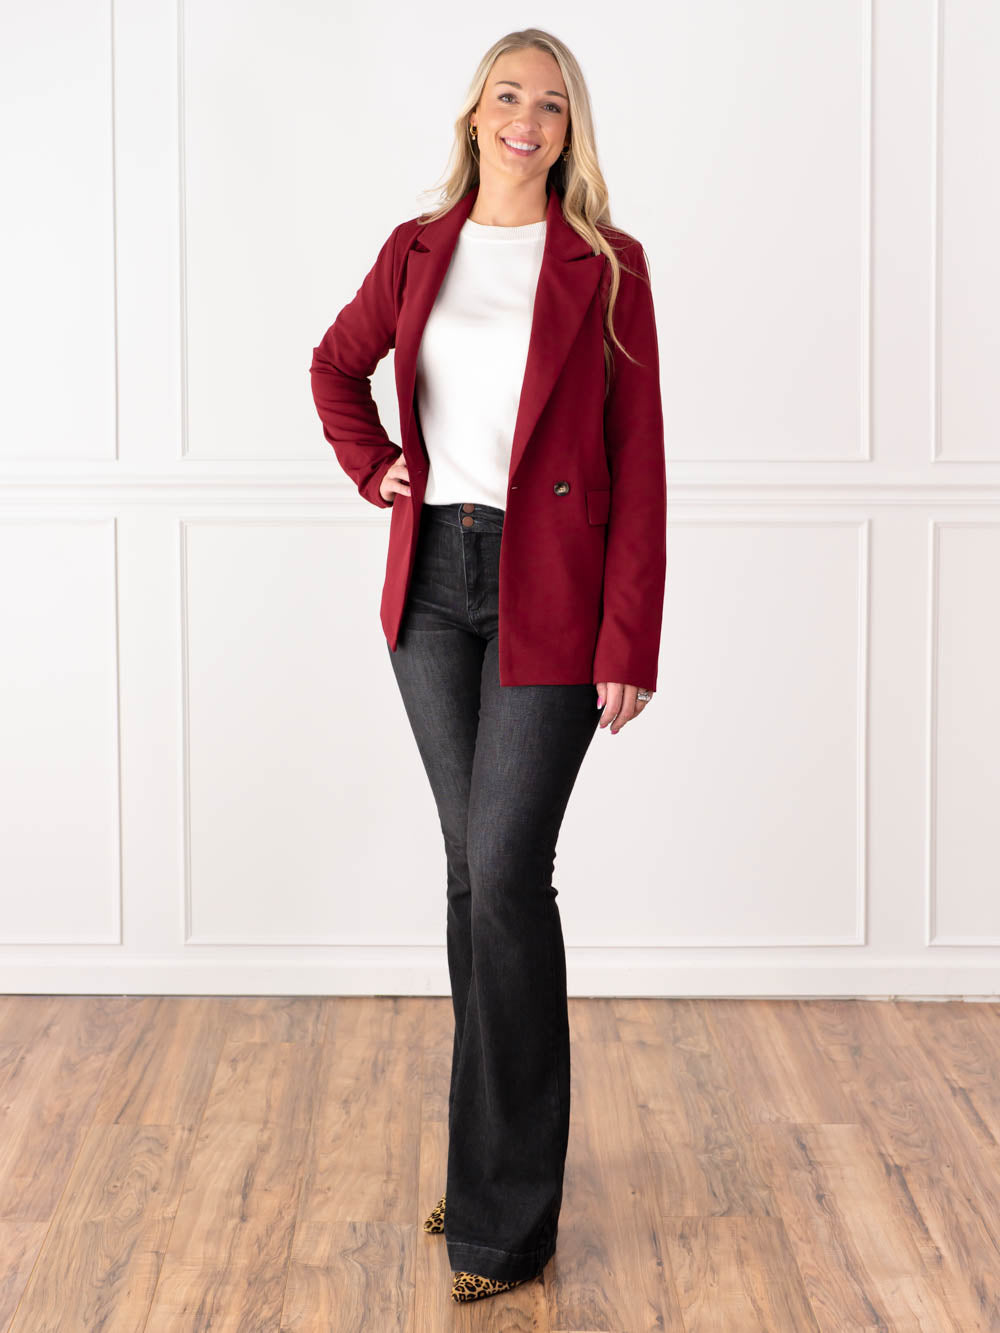 Blazer and Jeans Outfit for Tall Women - Amalli Talli